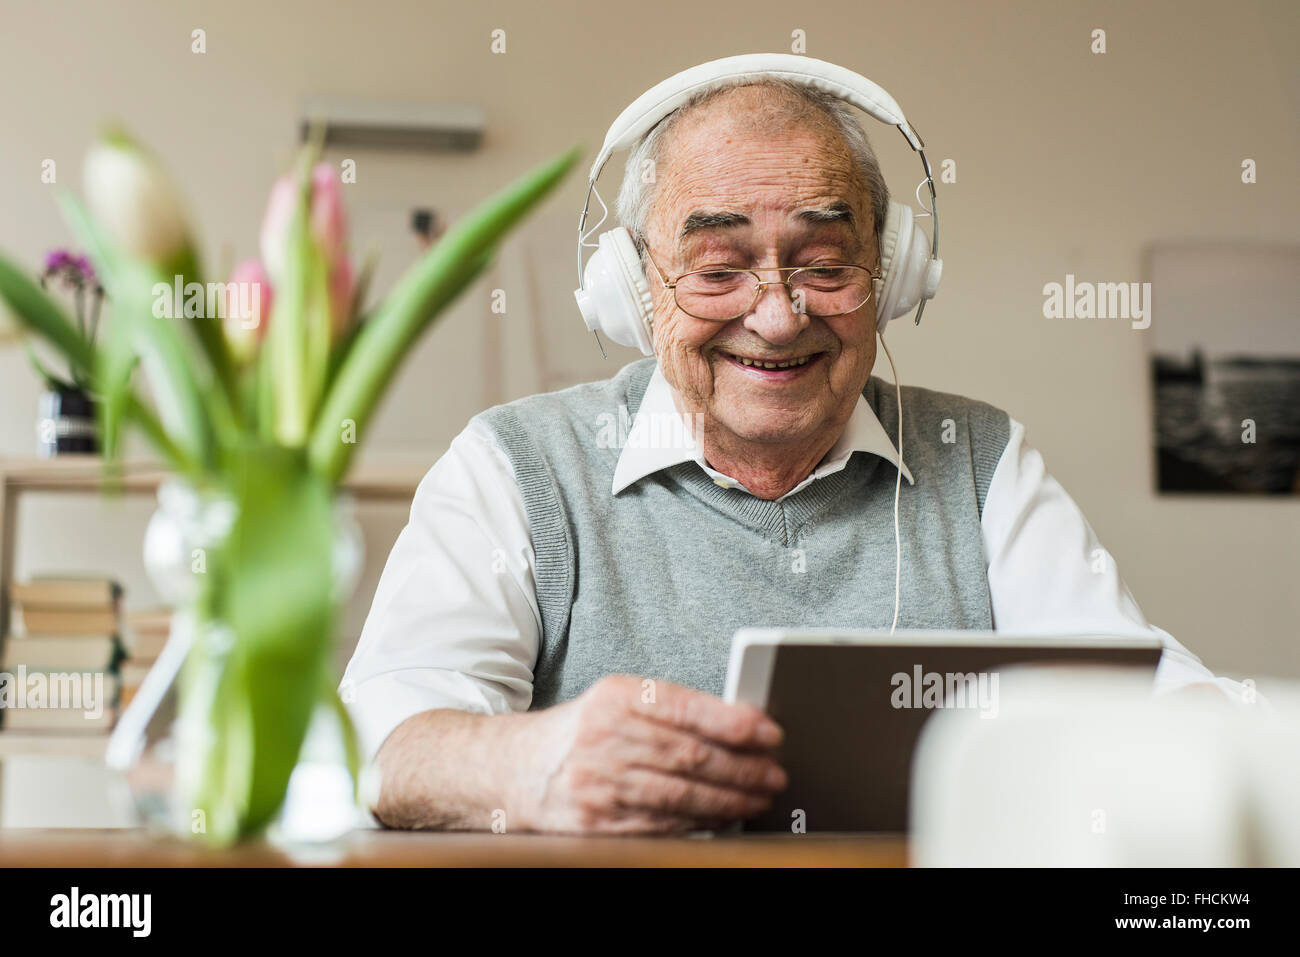 Senior man using mini tablet and headphones for skyping at home Stock Photo